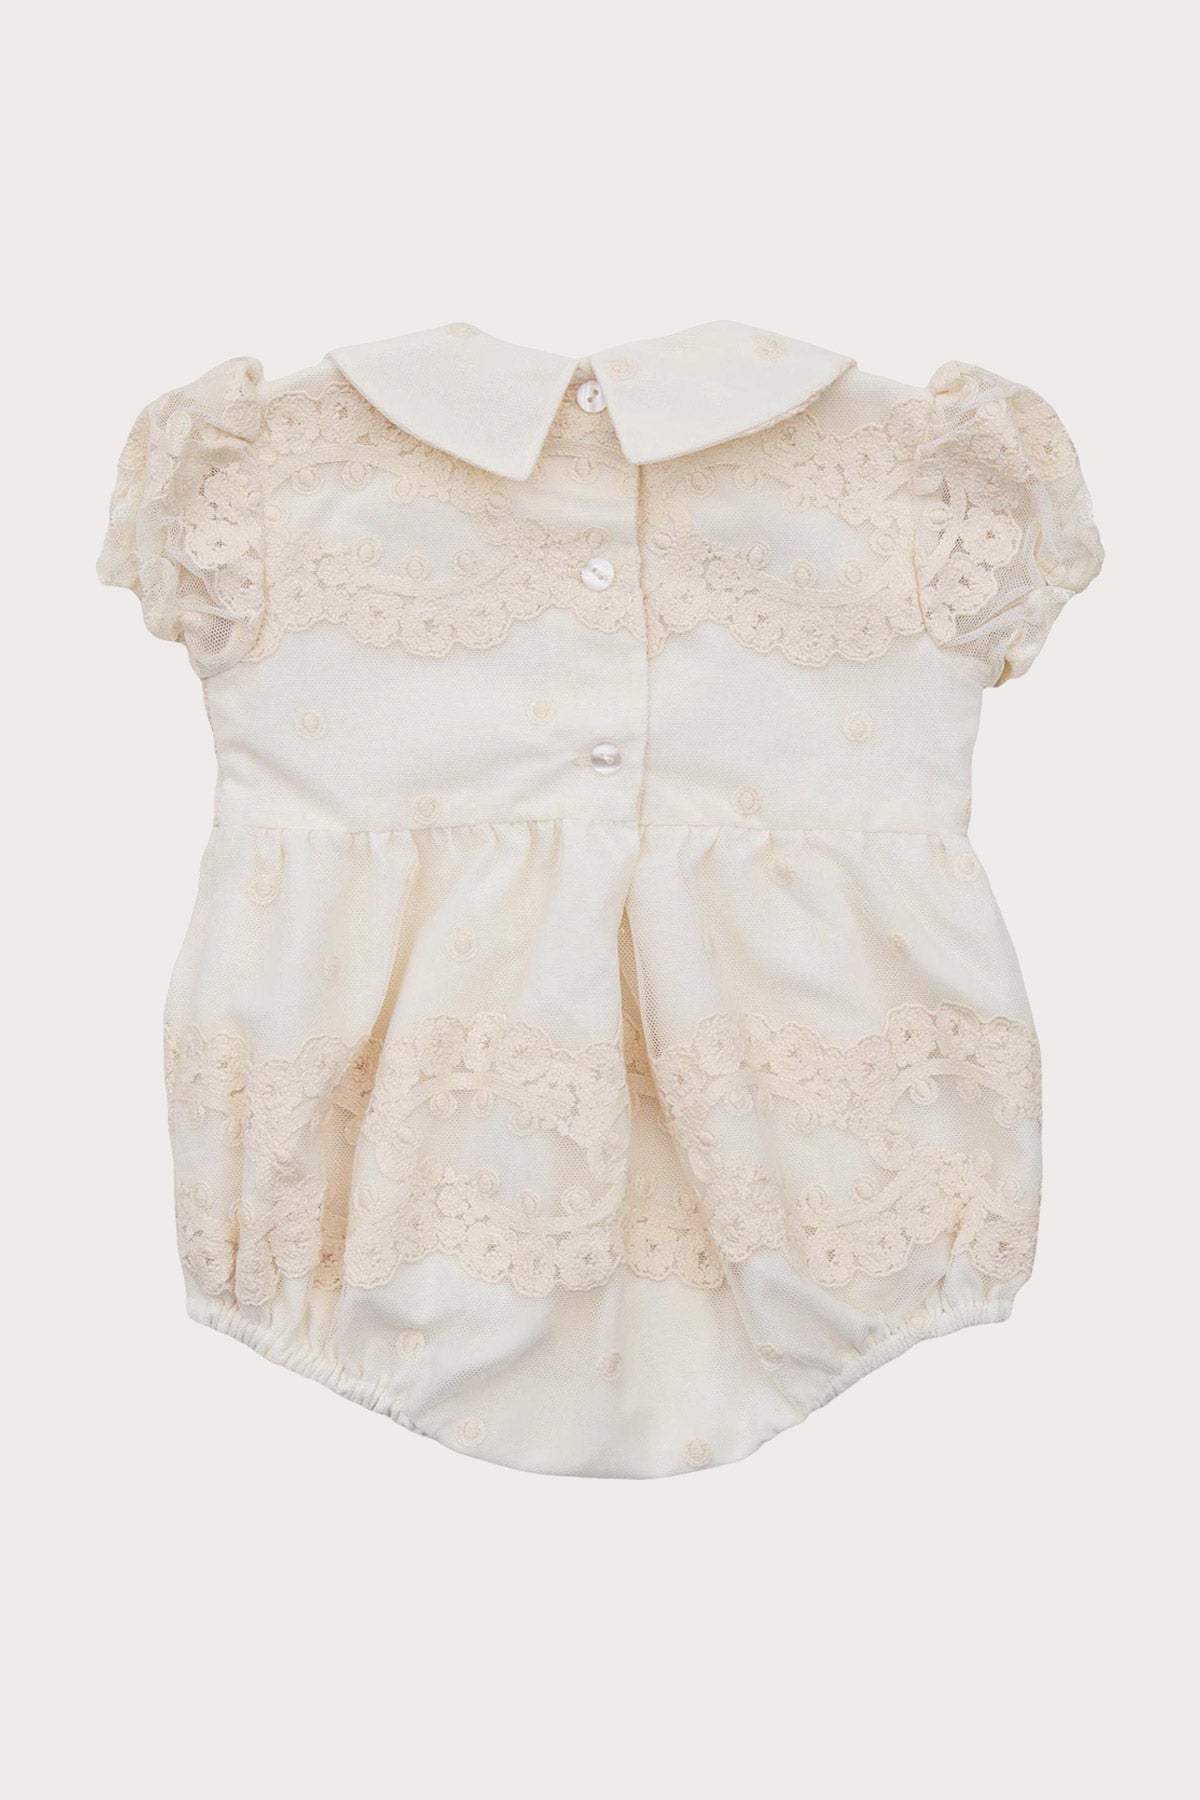 ivory lace baby romper